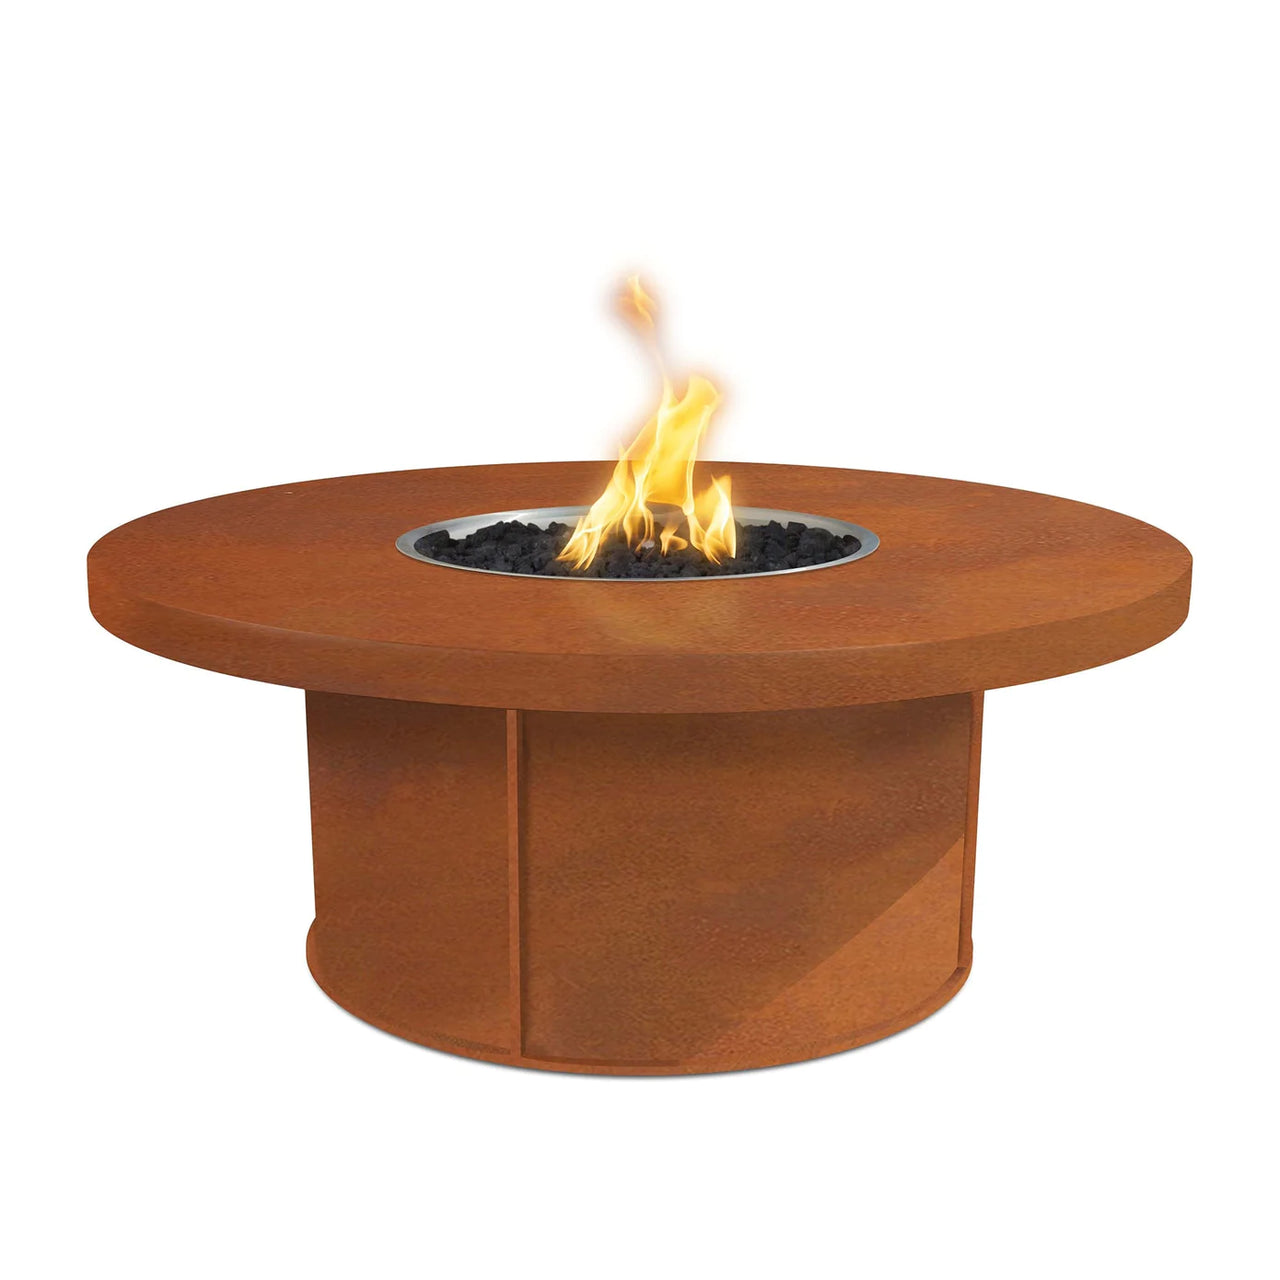 The Outdoor Plus 36" Round Mabel Corten Steel Fire Table